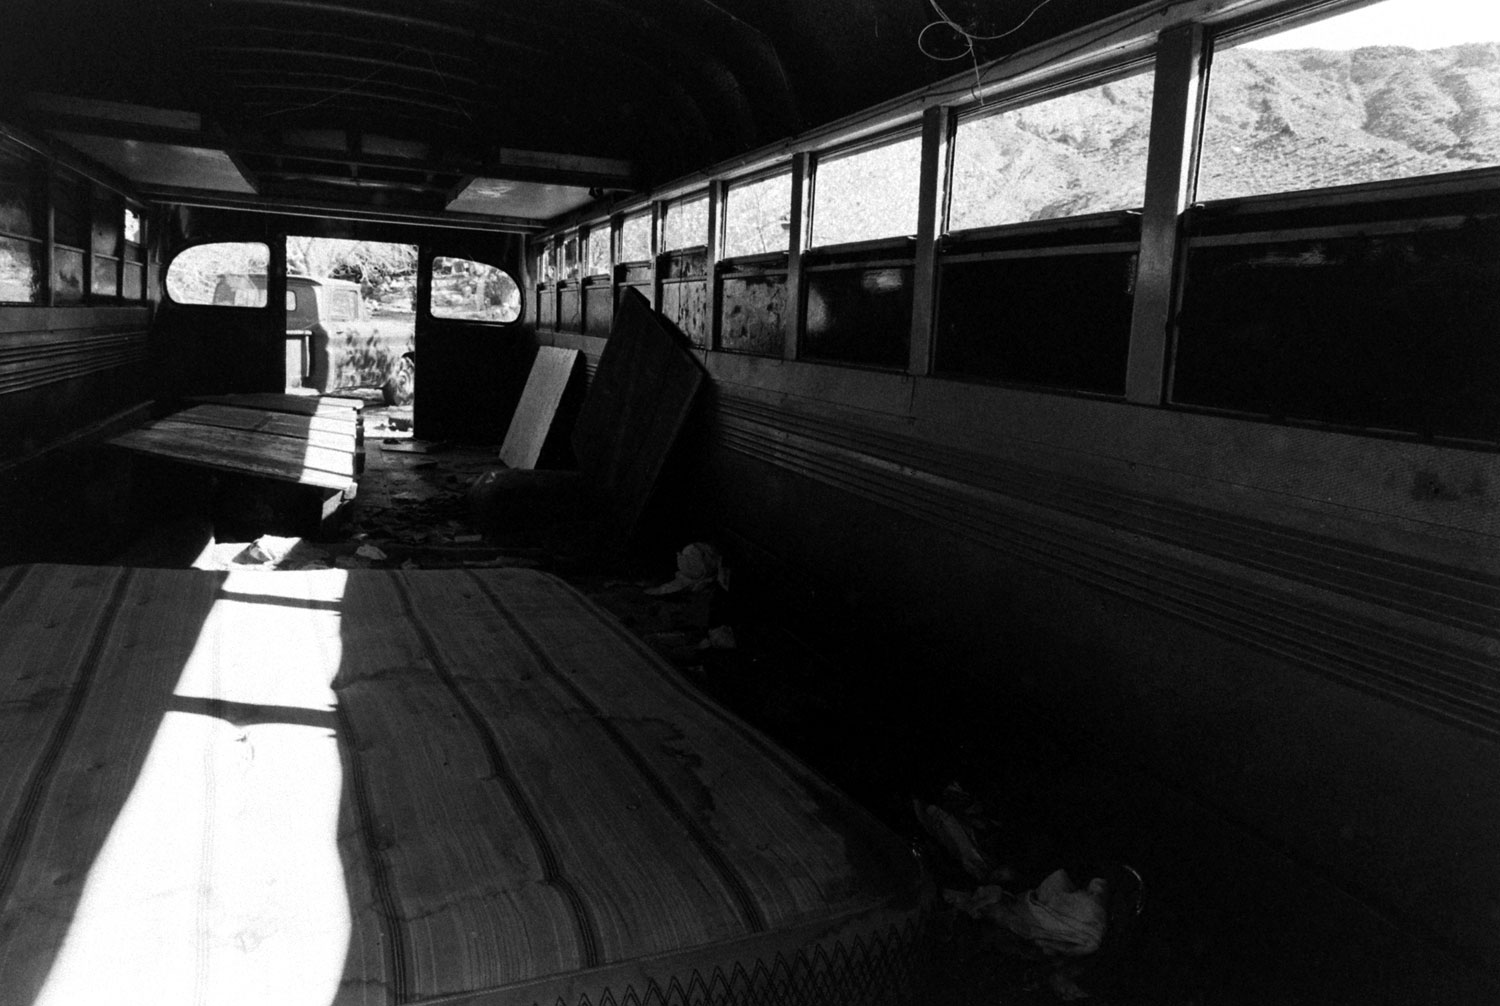 Bus on the Barker Ranch, one-time home of the Manson Family, 1969.